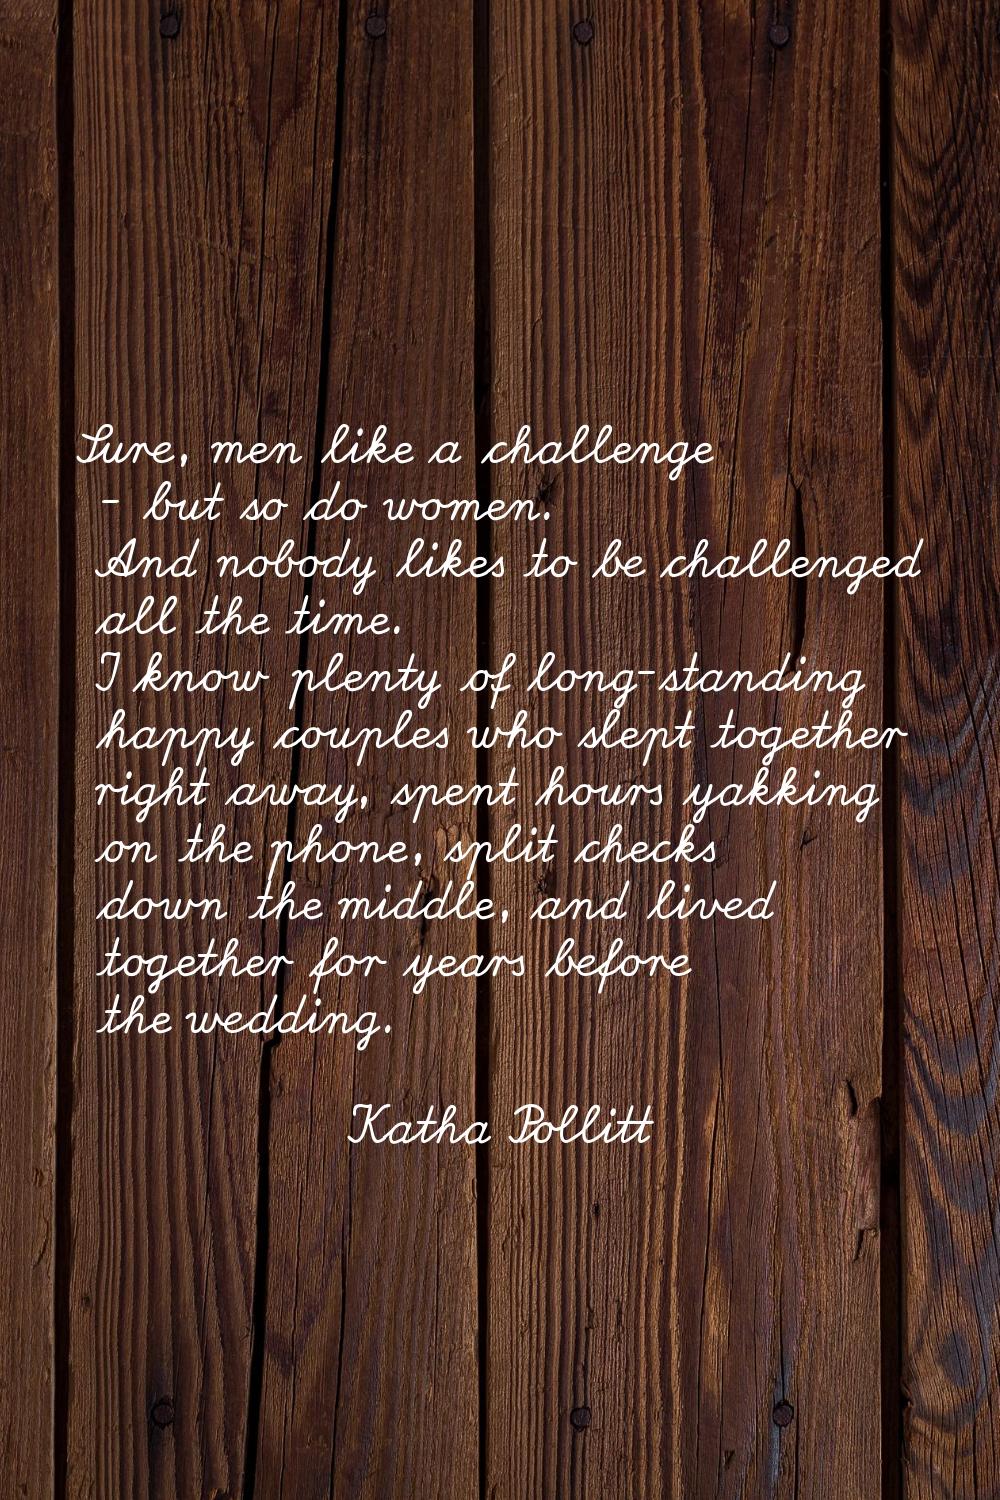 Sure, men like a challenge - but so do women. And nobody likes to be challenged all the time. I kno